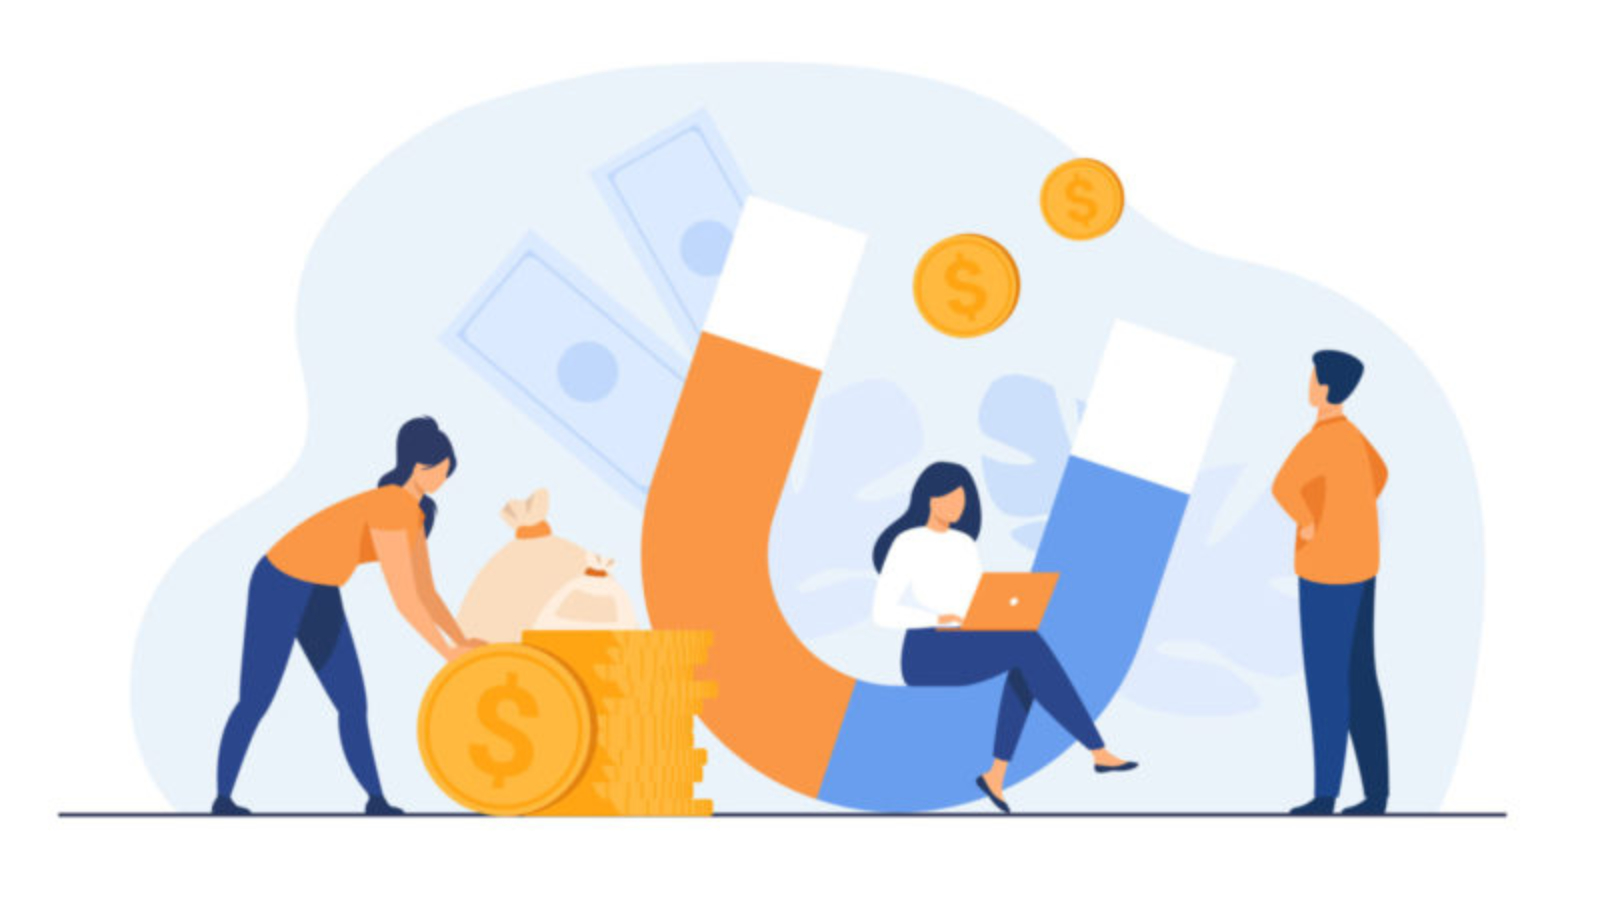 Income and money attraction. People with magnet getting cash. Vector illustration for fast loan, income, investment, profit, finance, success concept